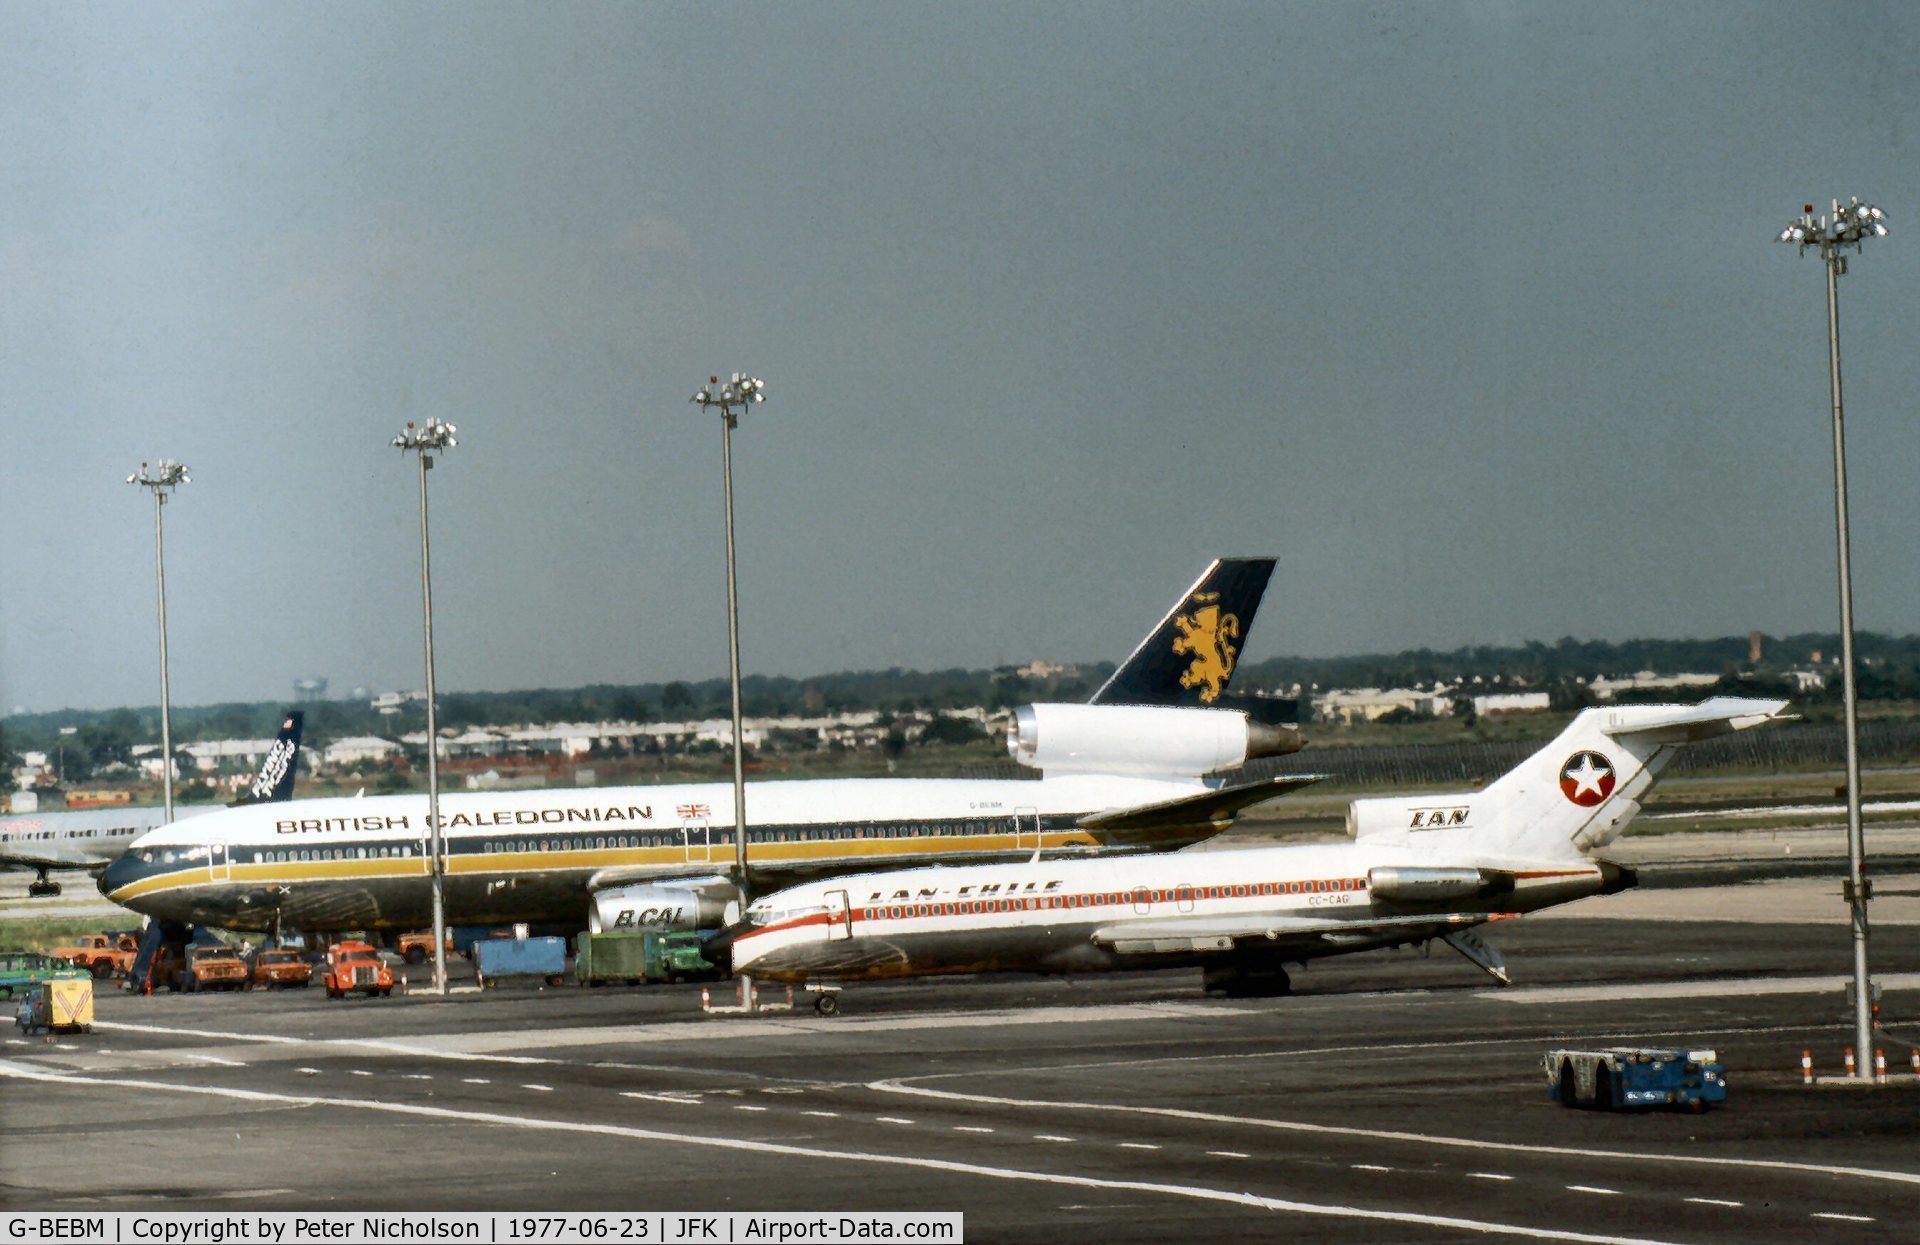 G-BEBM, 1975 McDonnell Douglas DC-10-30F C/N 46921, DC-10-30 of British Caledonian Airways parked at Kennedy in the Summer of 1977.